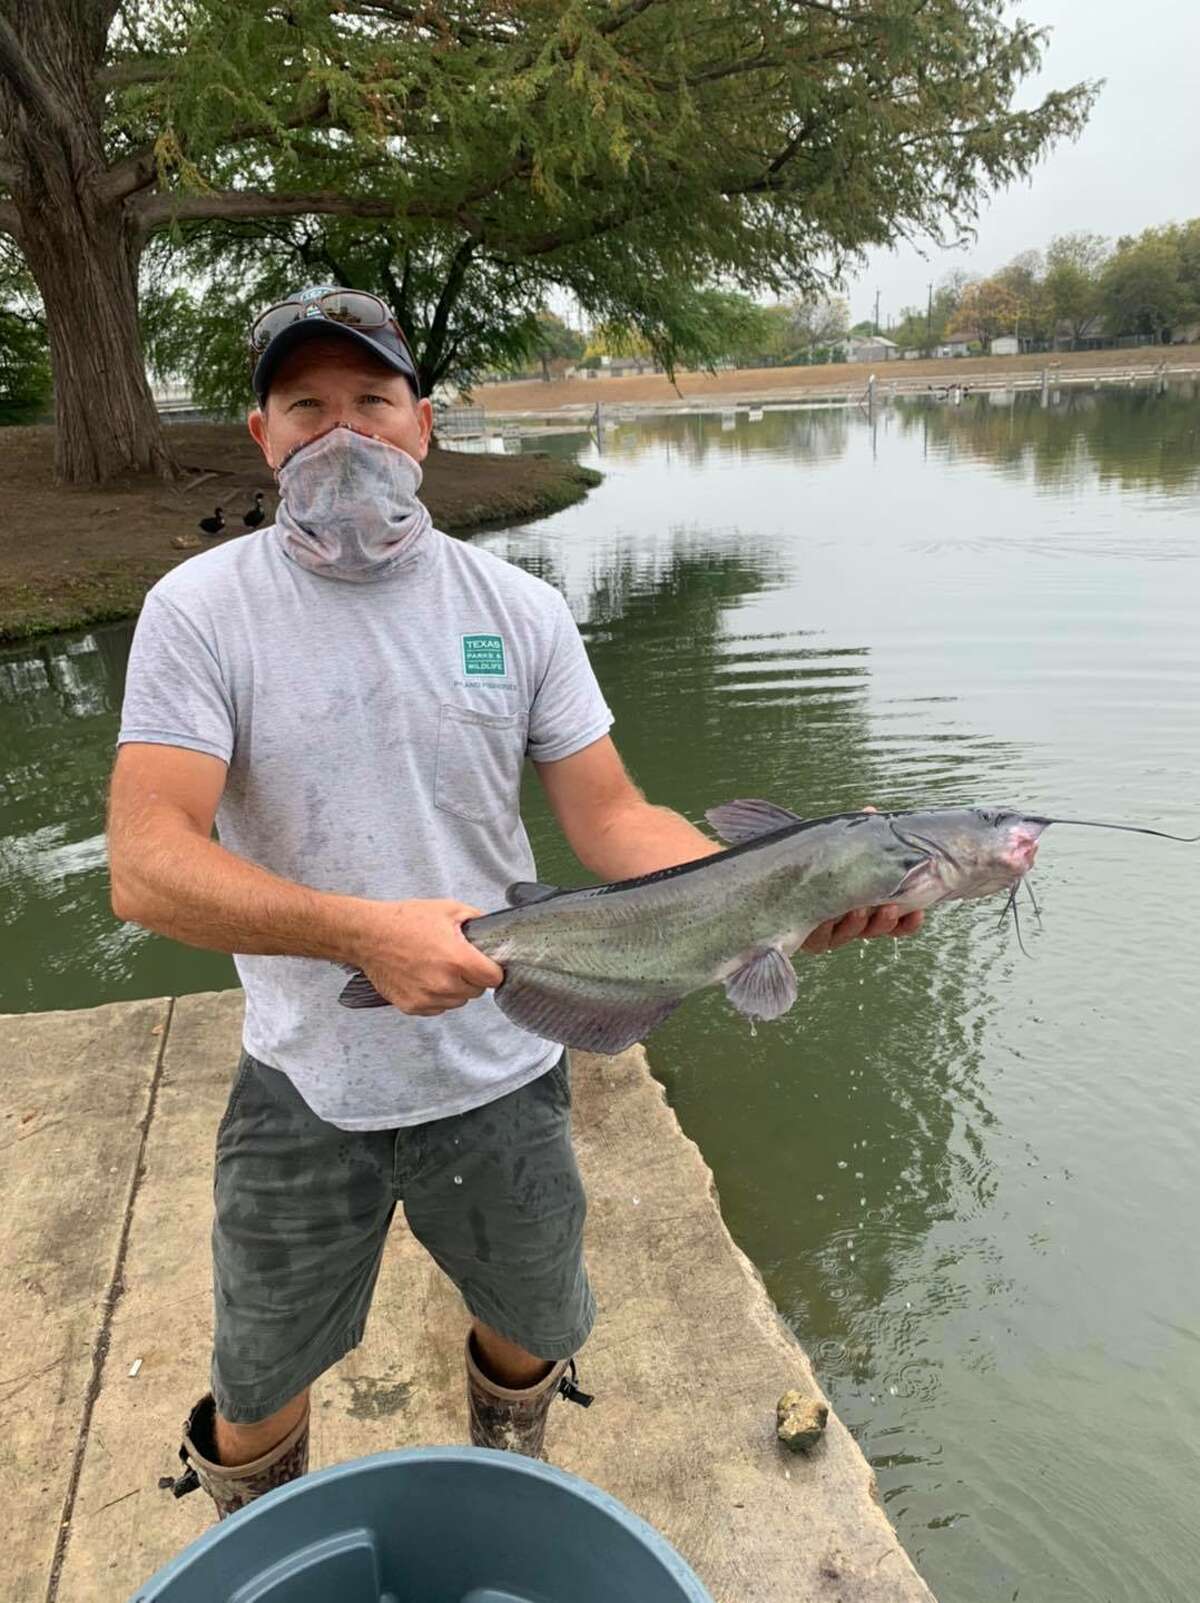 On Tuesday, Texas Parks and Wildlife officials stocked Elmendorf Lake with 50 trophy-sized catfish, according to a Facebook post from Inland Fisheries San Antonio District.